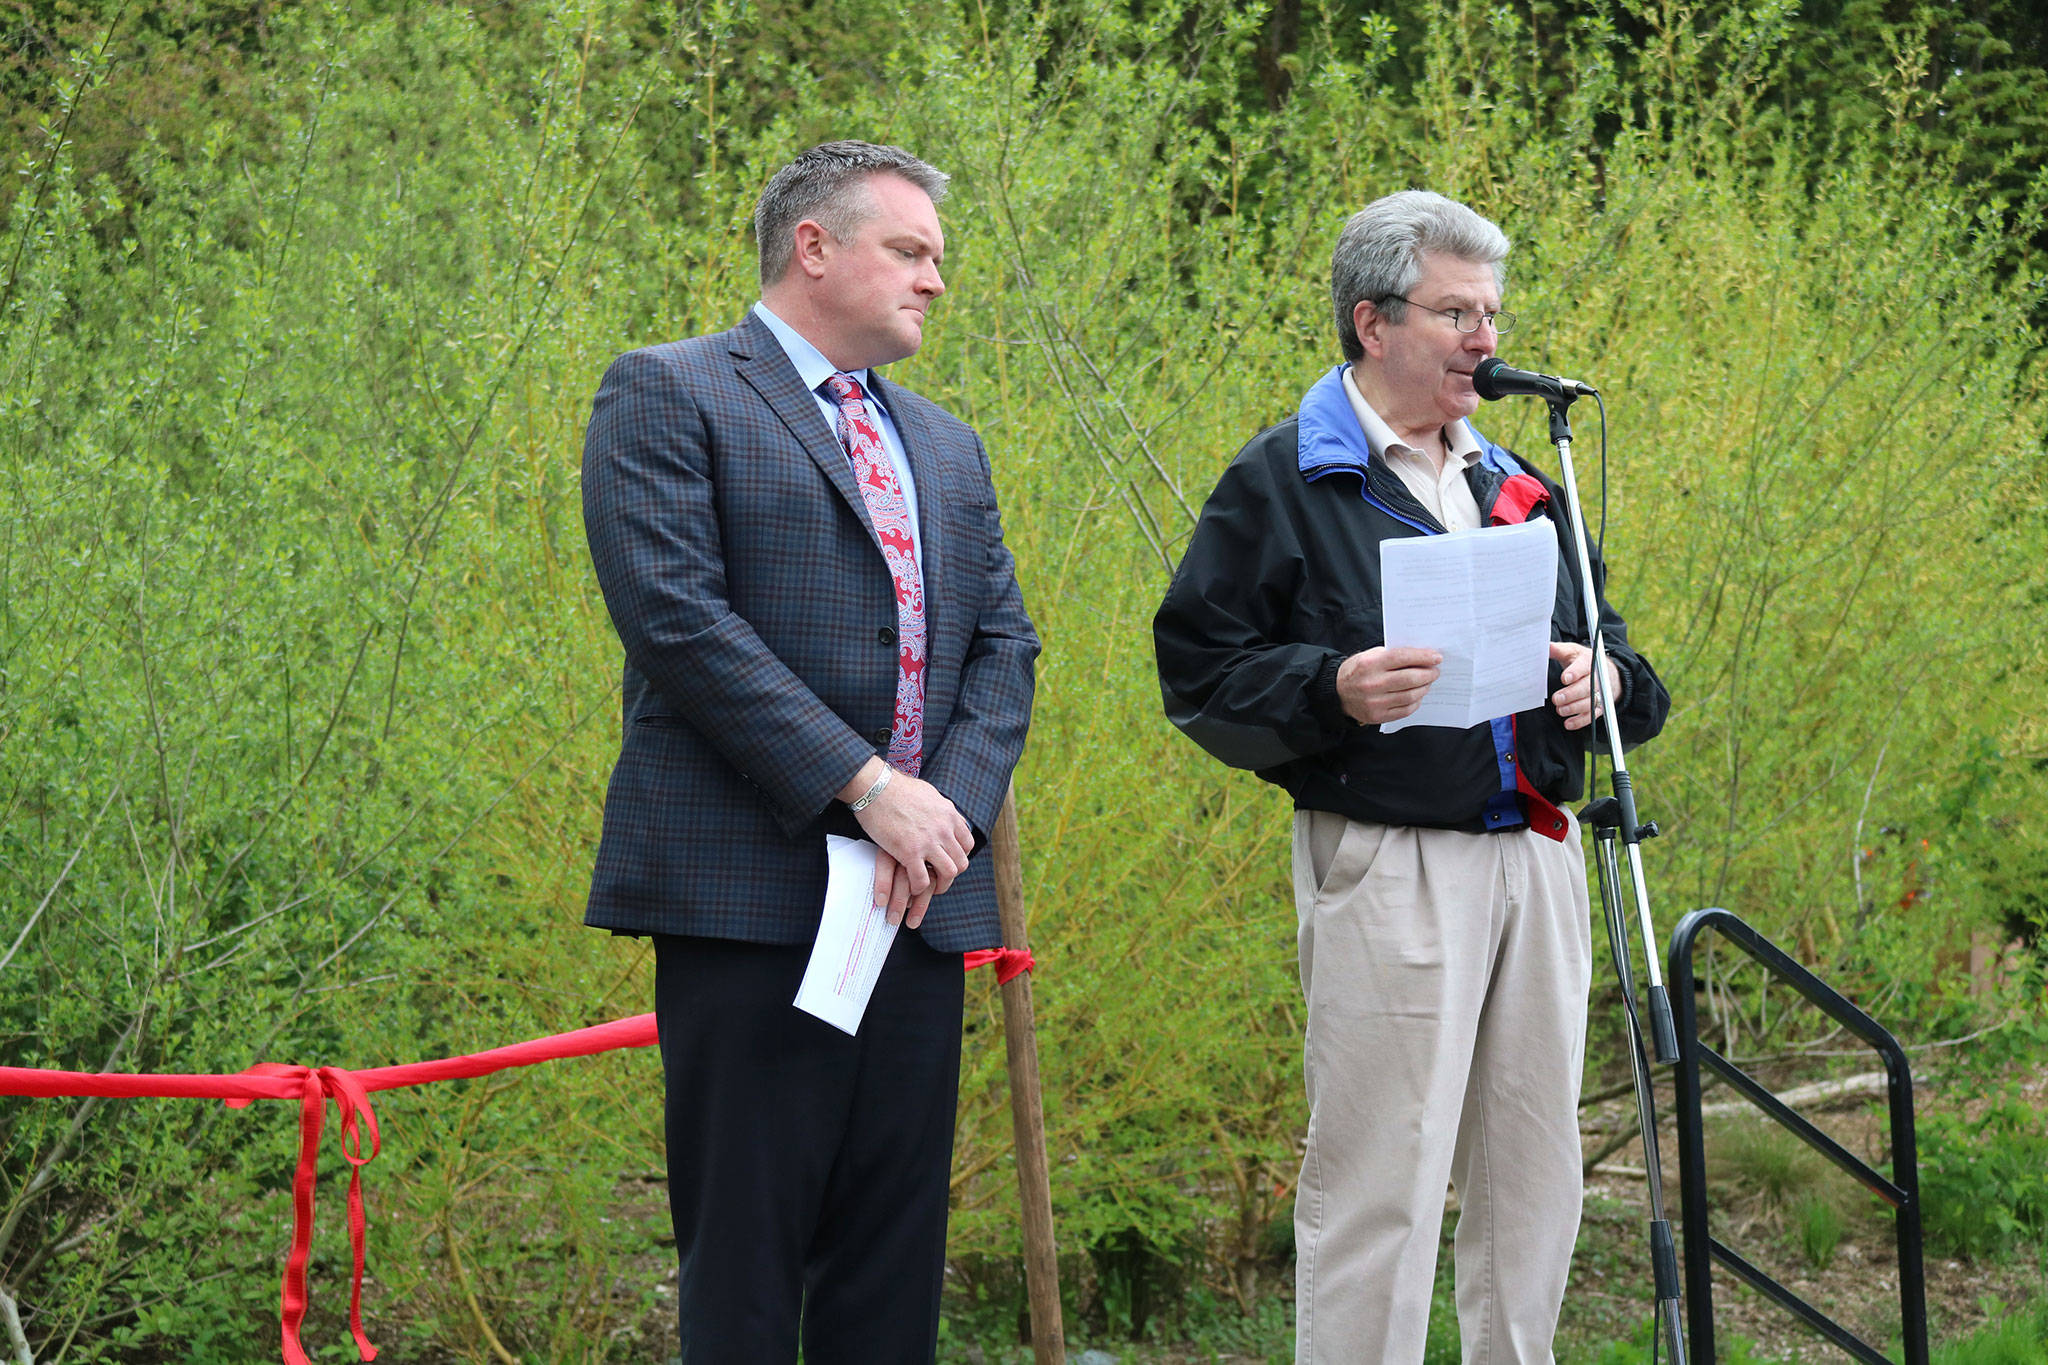 Bothell Mayor Andy Rheaume listens as Help Our Woods’ Paul Clement addresses the crowd. CATHERINE KRUMMEY / Bothell Reporter